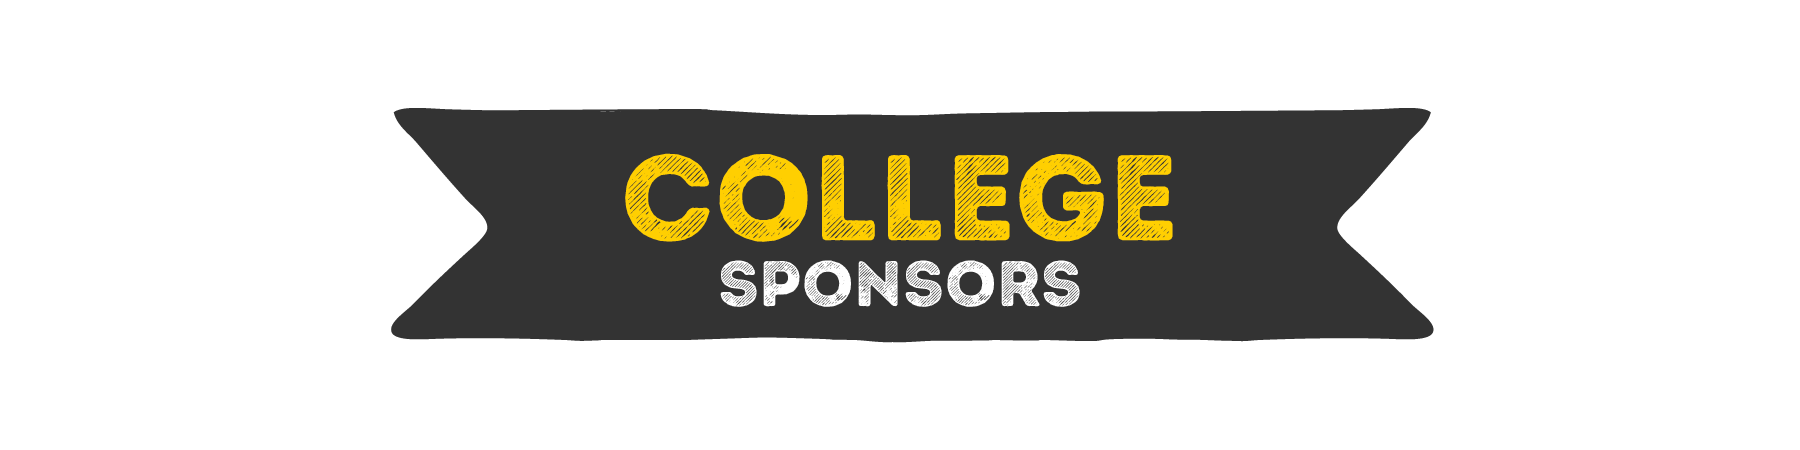 Q-give college sponsor.png